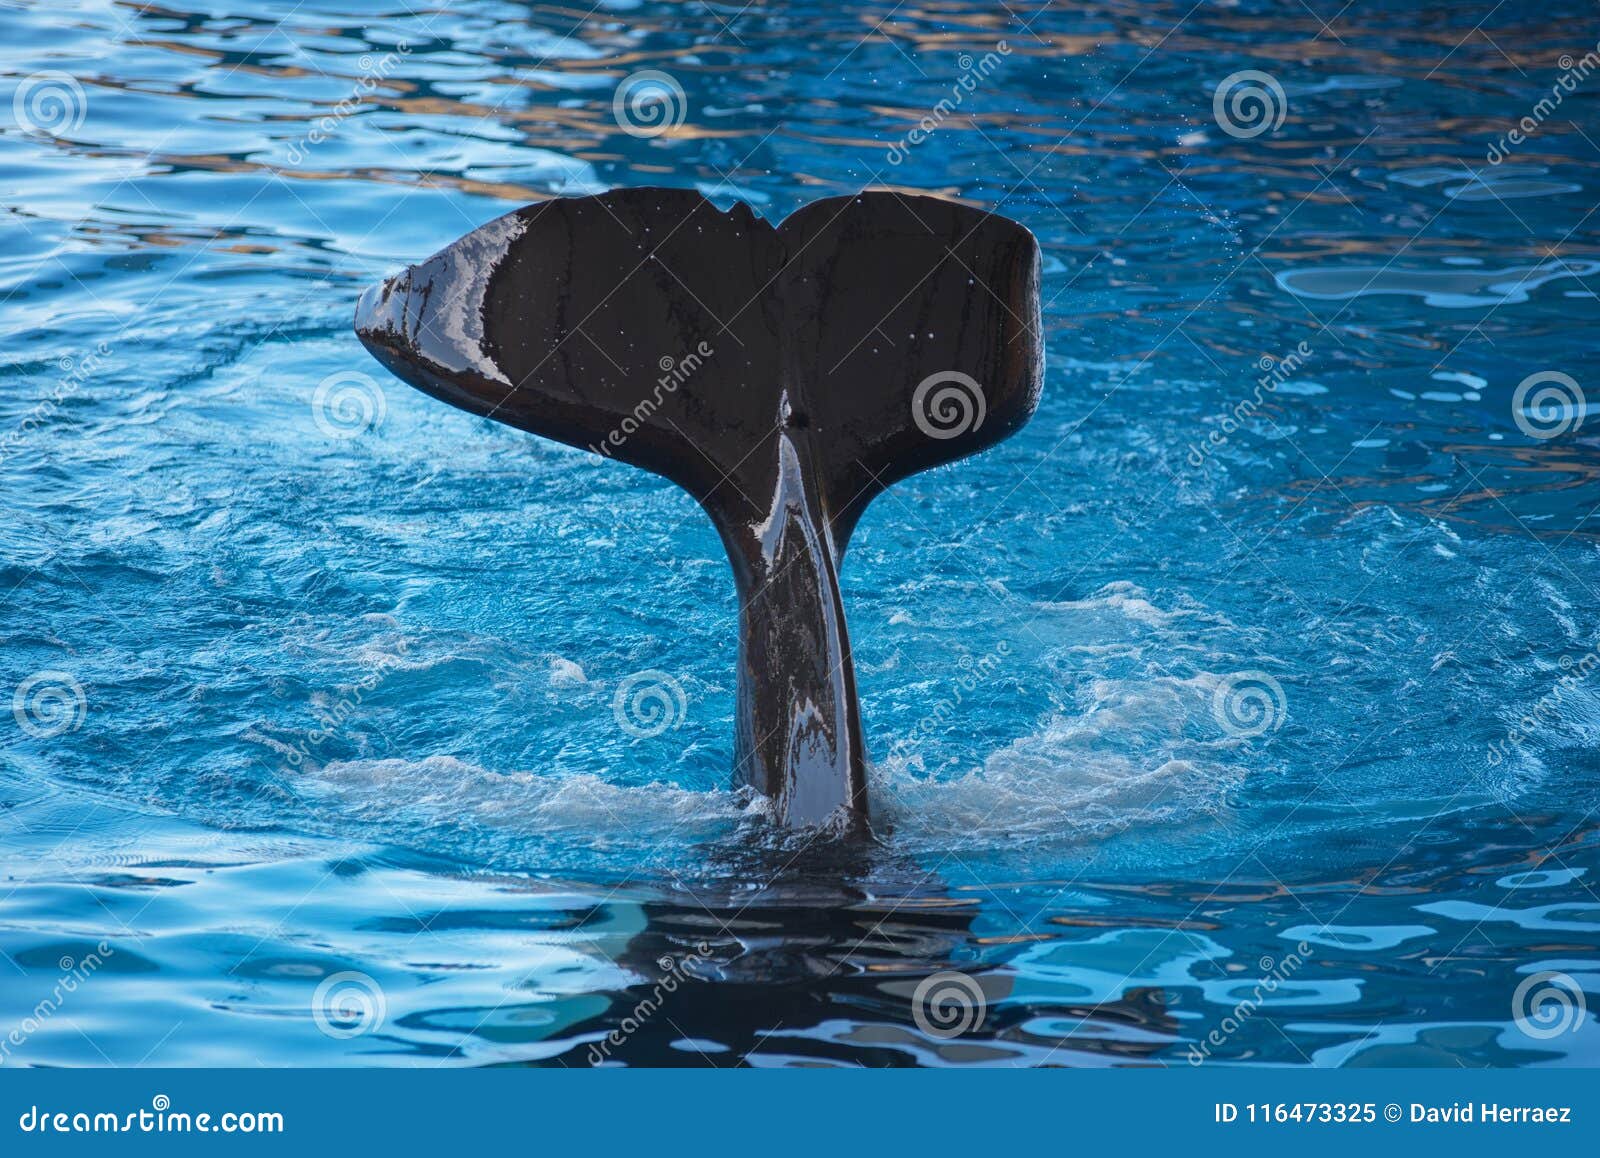 Killer Whale Fin Splashing on the Water Stock Image - Image of power ...